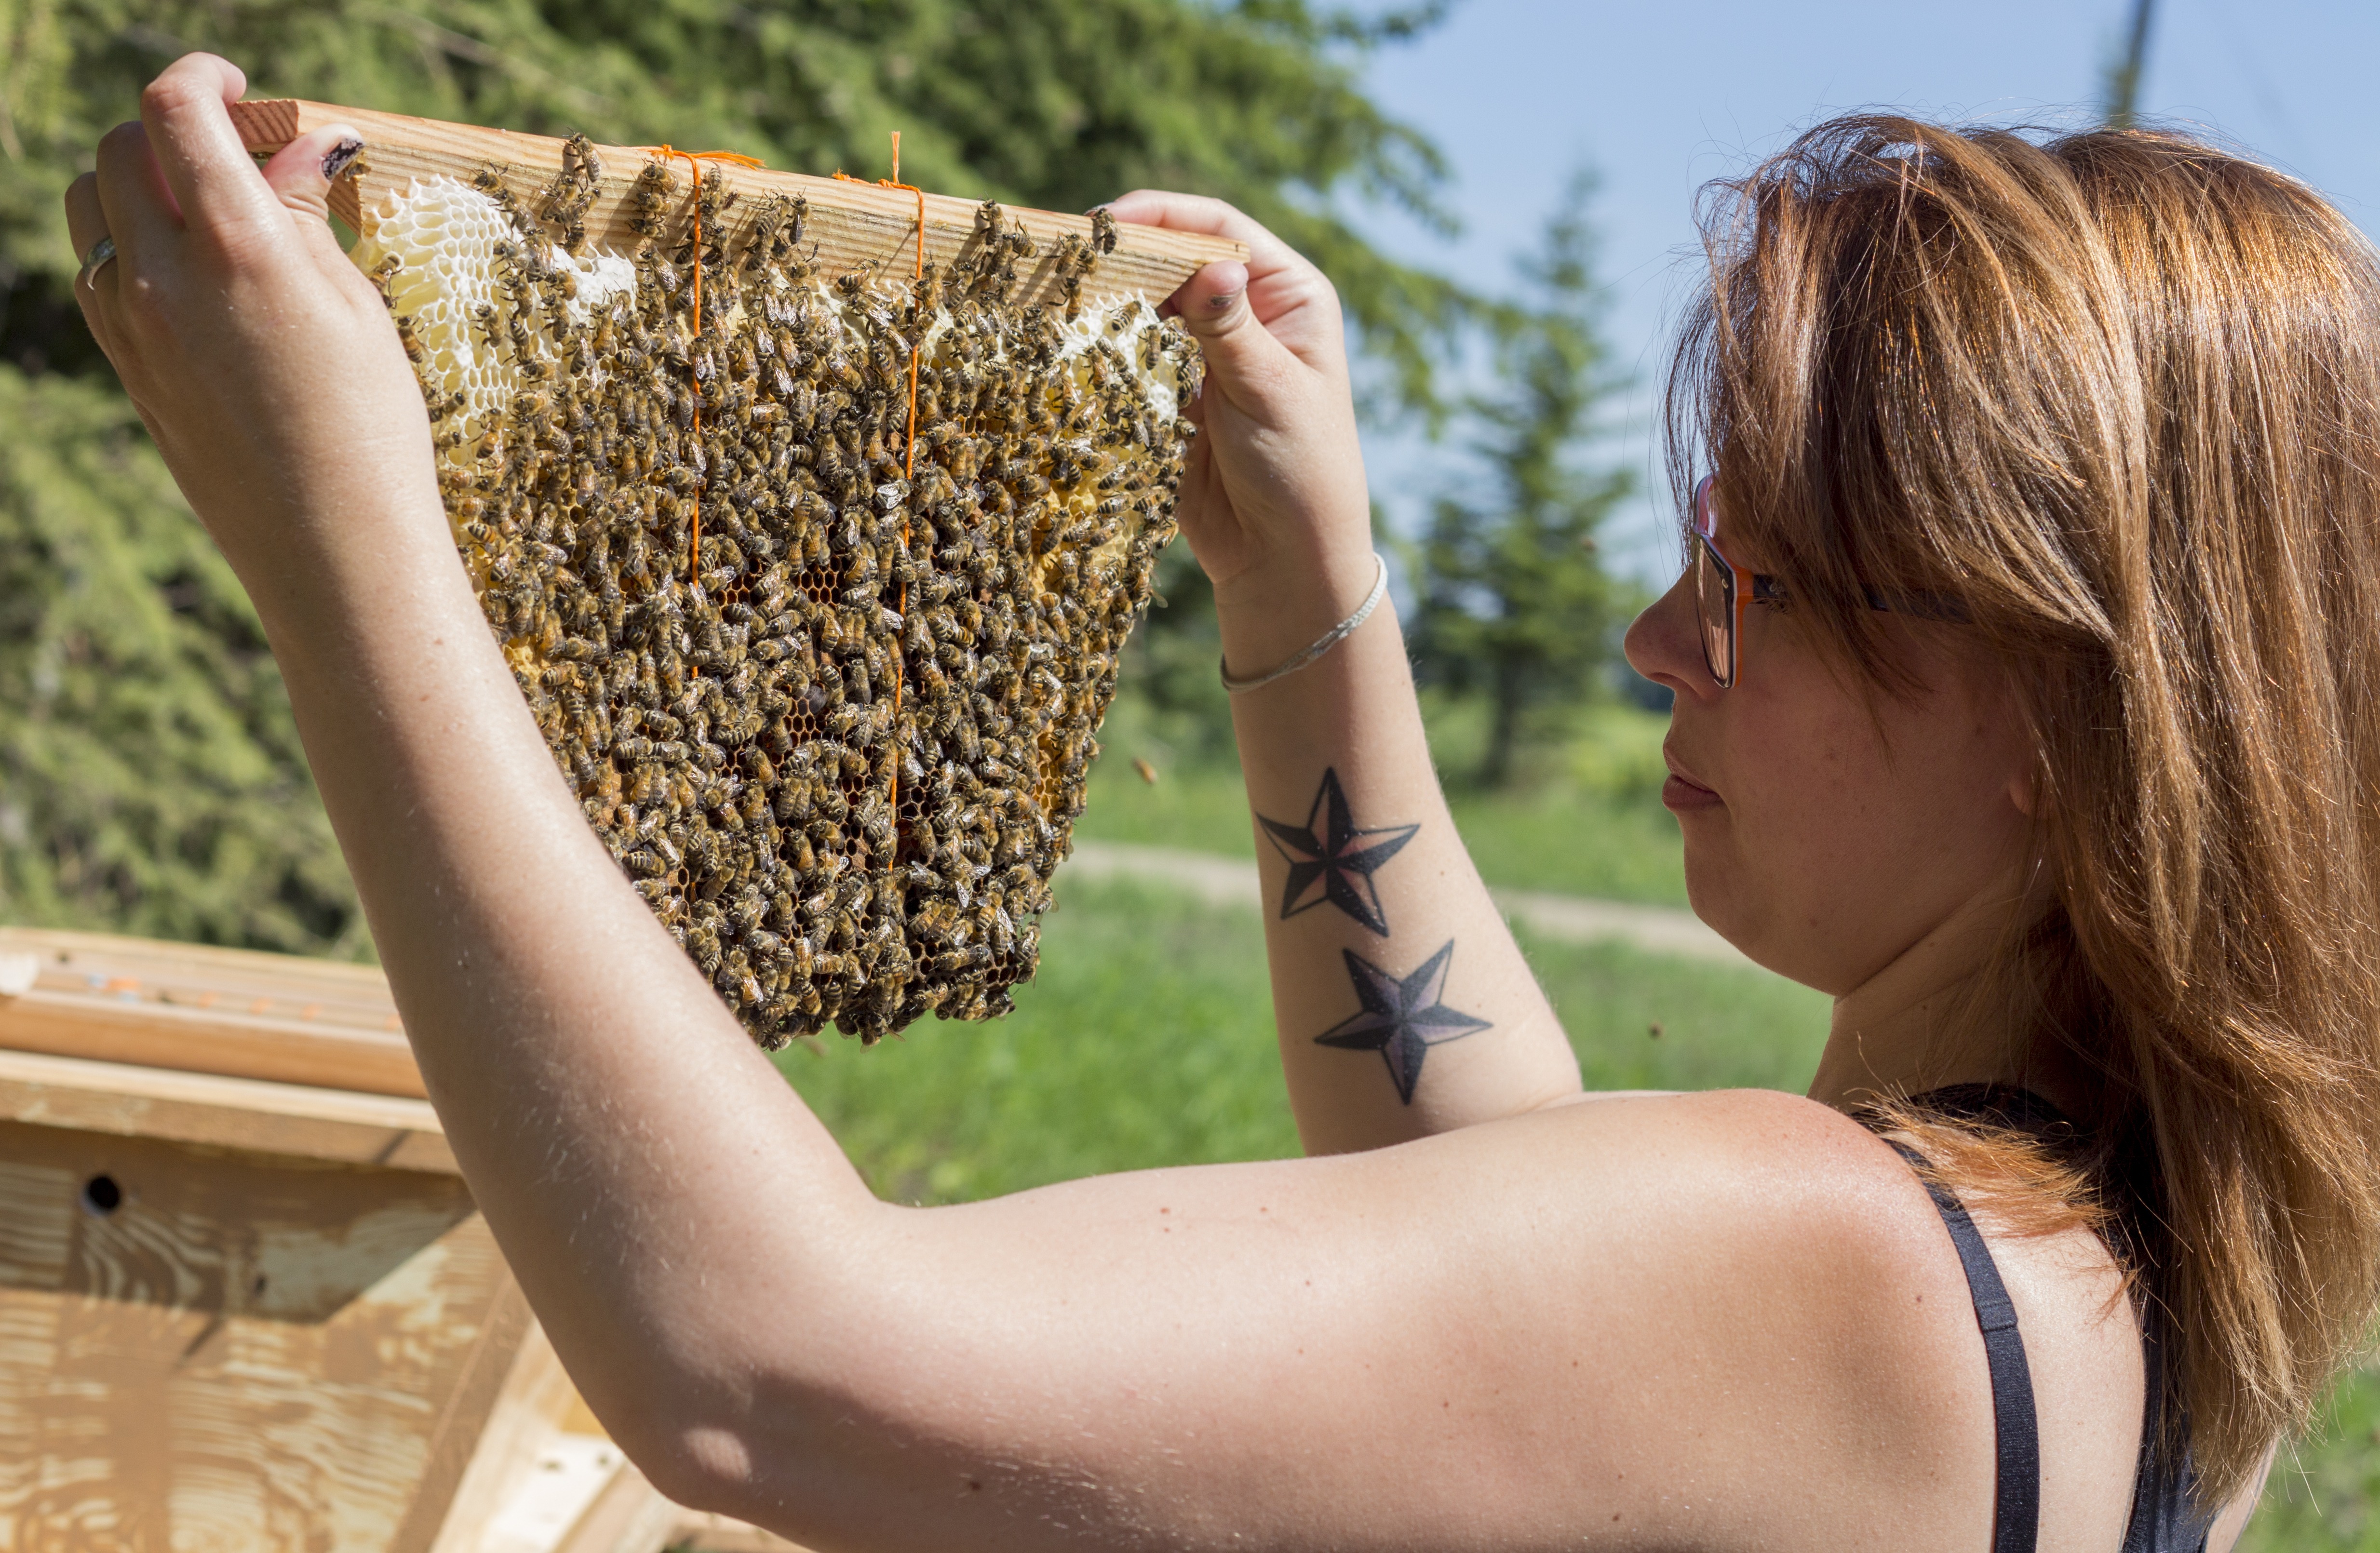 MINDING THE COMB – Beekeeper Carol Van de Weghe checks out the honey on a comb from her hive during a regular inspection.